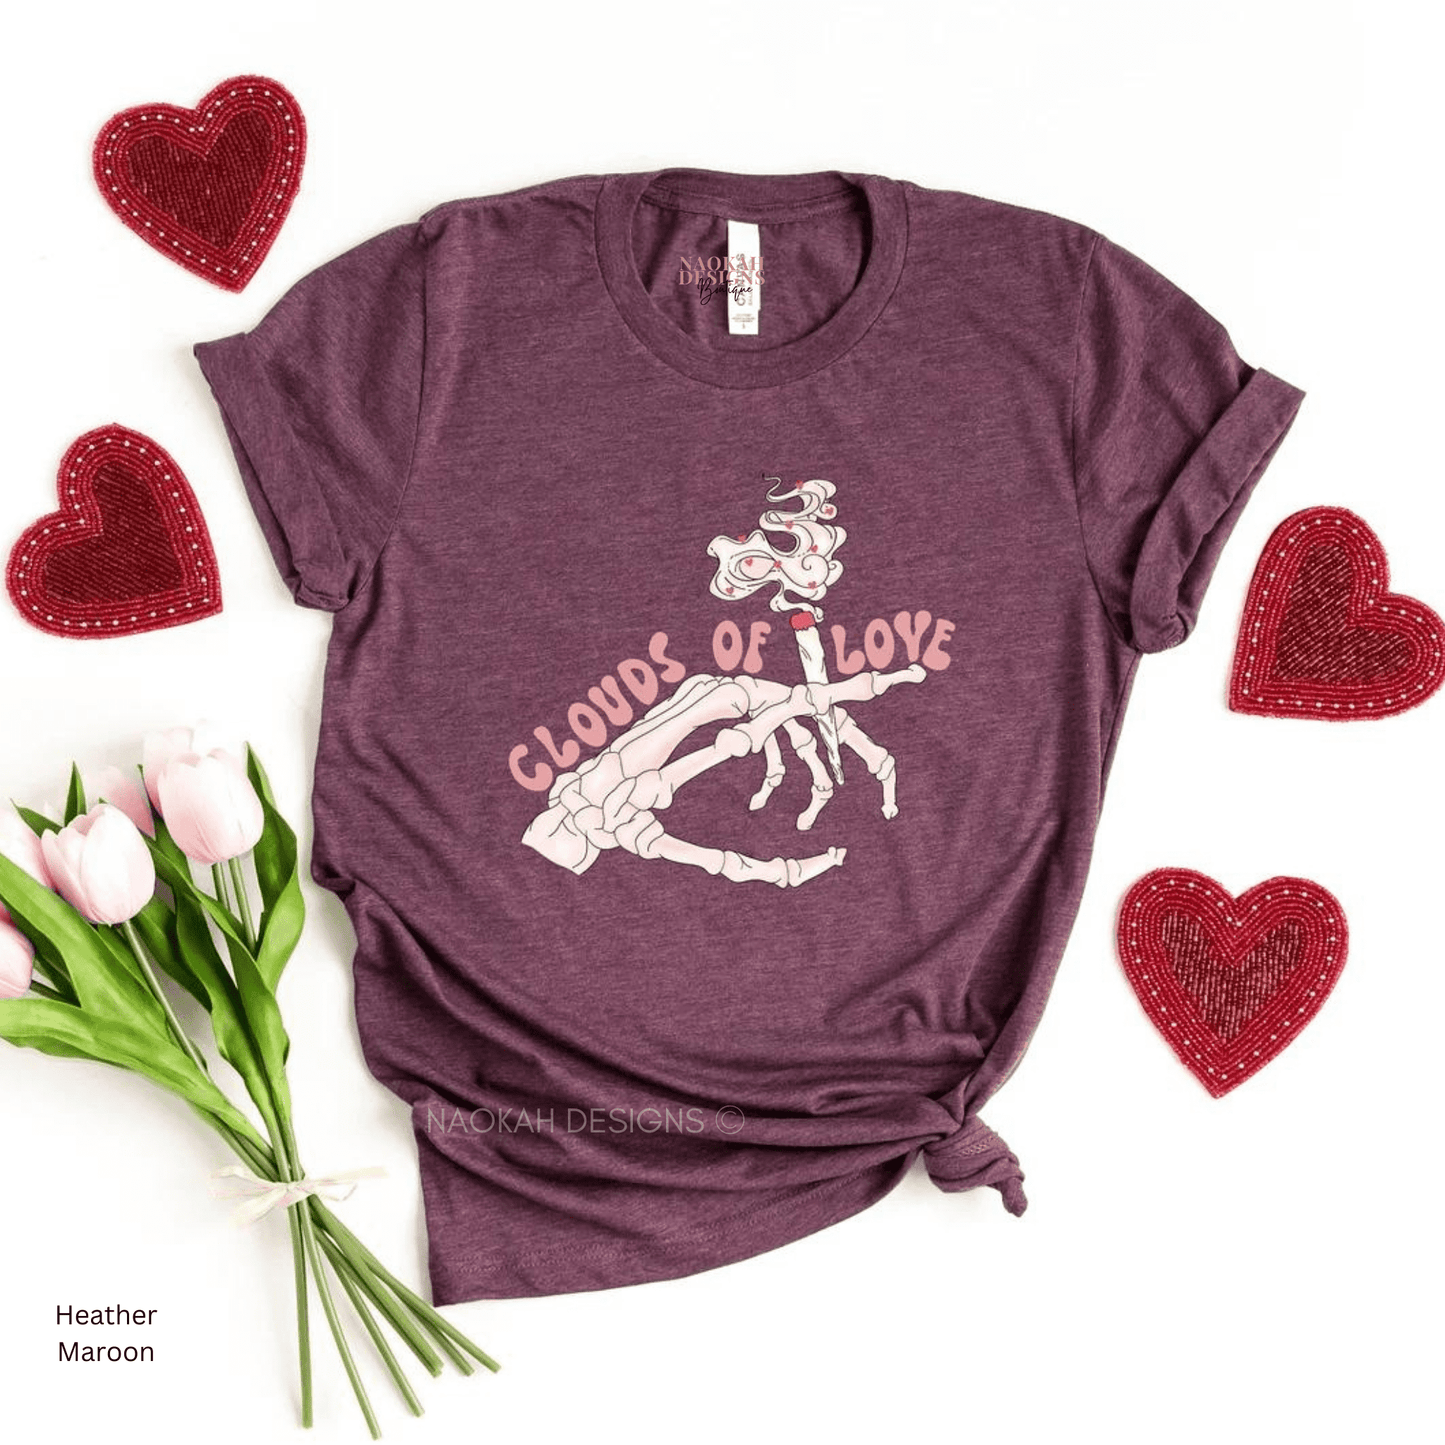 clouds of love shirt, skeleton hands valentine shirt, valentines day shirt, be mine shirt, xoxo tshirt, lovely valentines day, marijuana shirt, toker shirt, weed lover shirt, weed valentine shirt, best buds shirt, rolling joint shirt, rolling into christmas shirt, rolling into valentines shirt